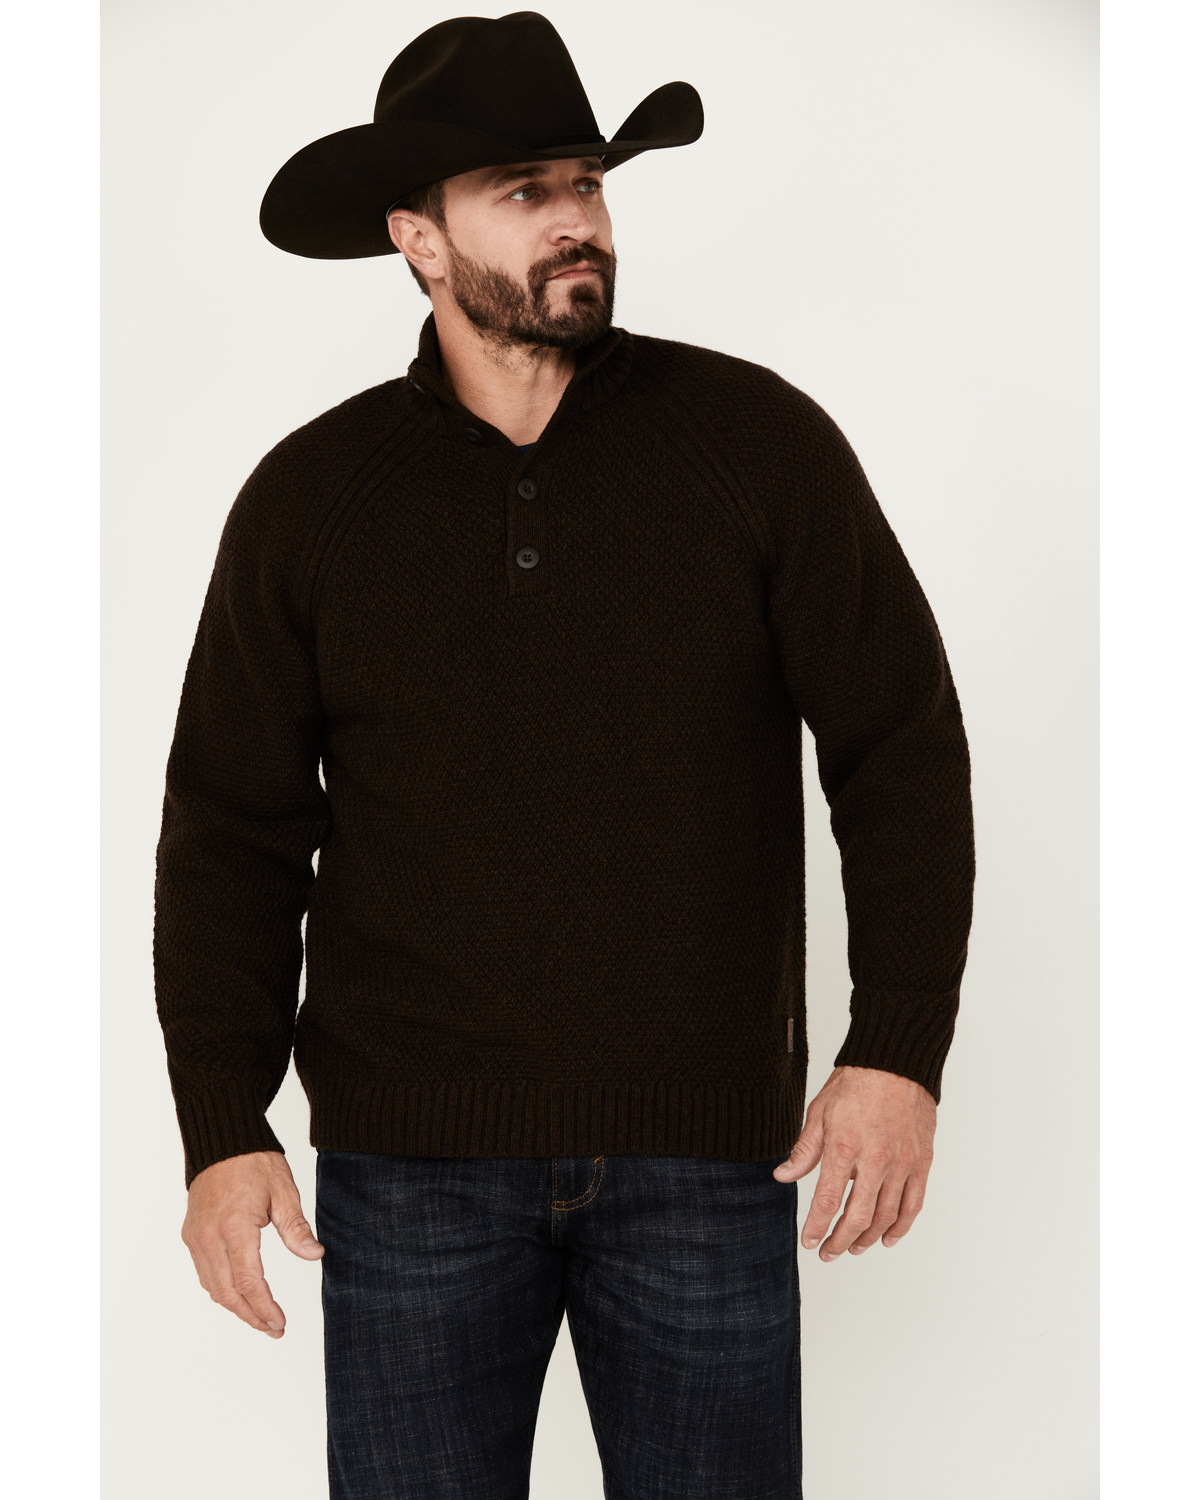 Brothers and Sons Men's Merino Donegal Button Down Mock Neck Sweater